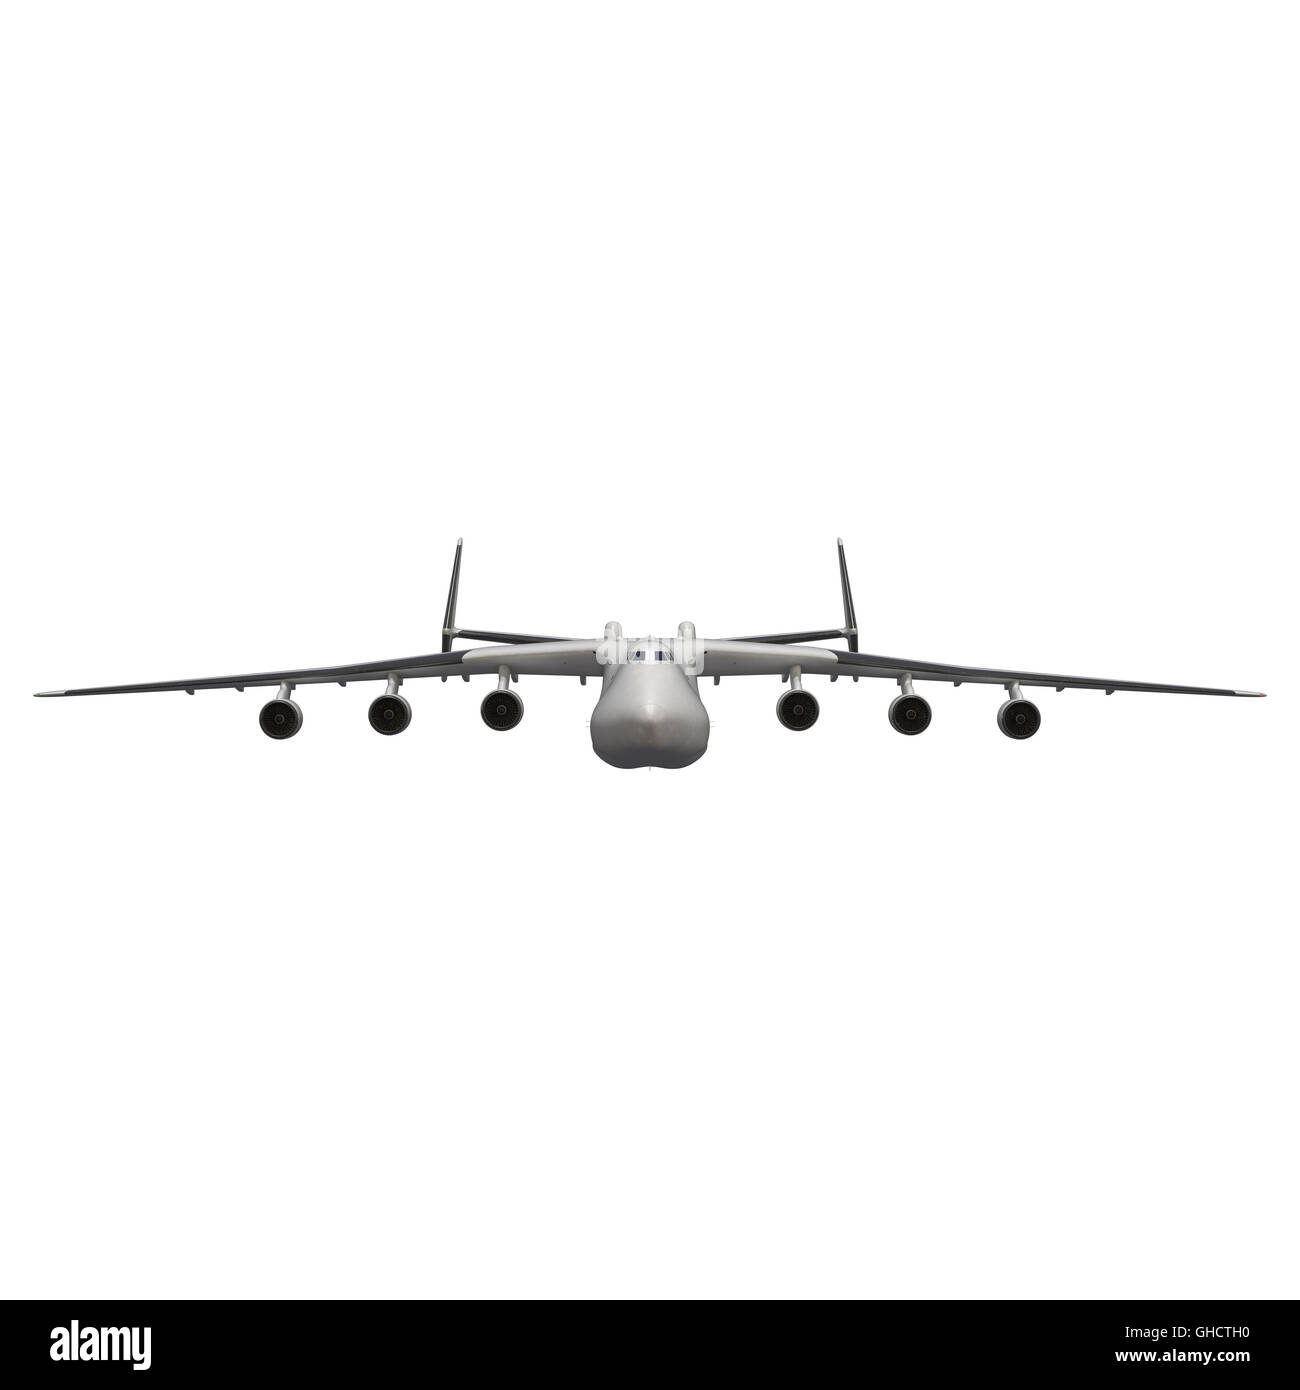 Isolated aircraft 3d rendering Stock Photo